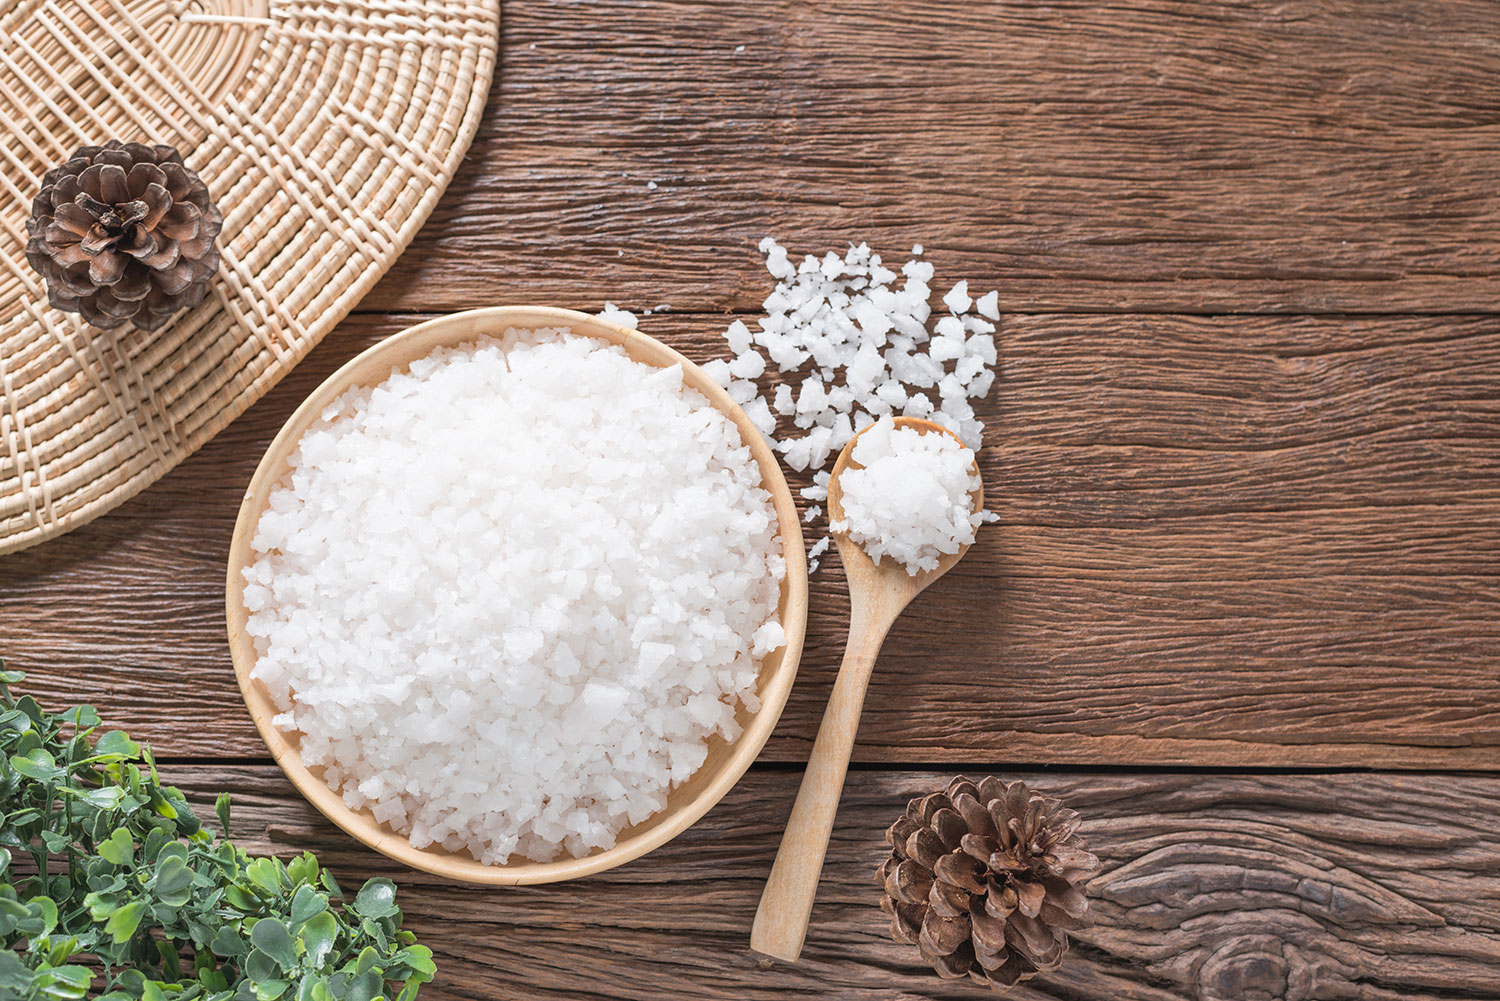 Can Dead Sea Salts Reduce Psoriasis Flakes